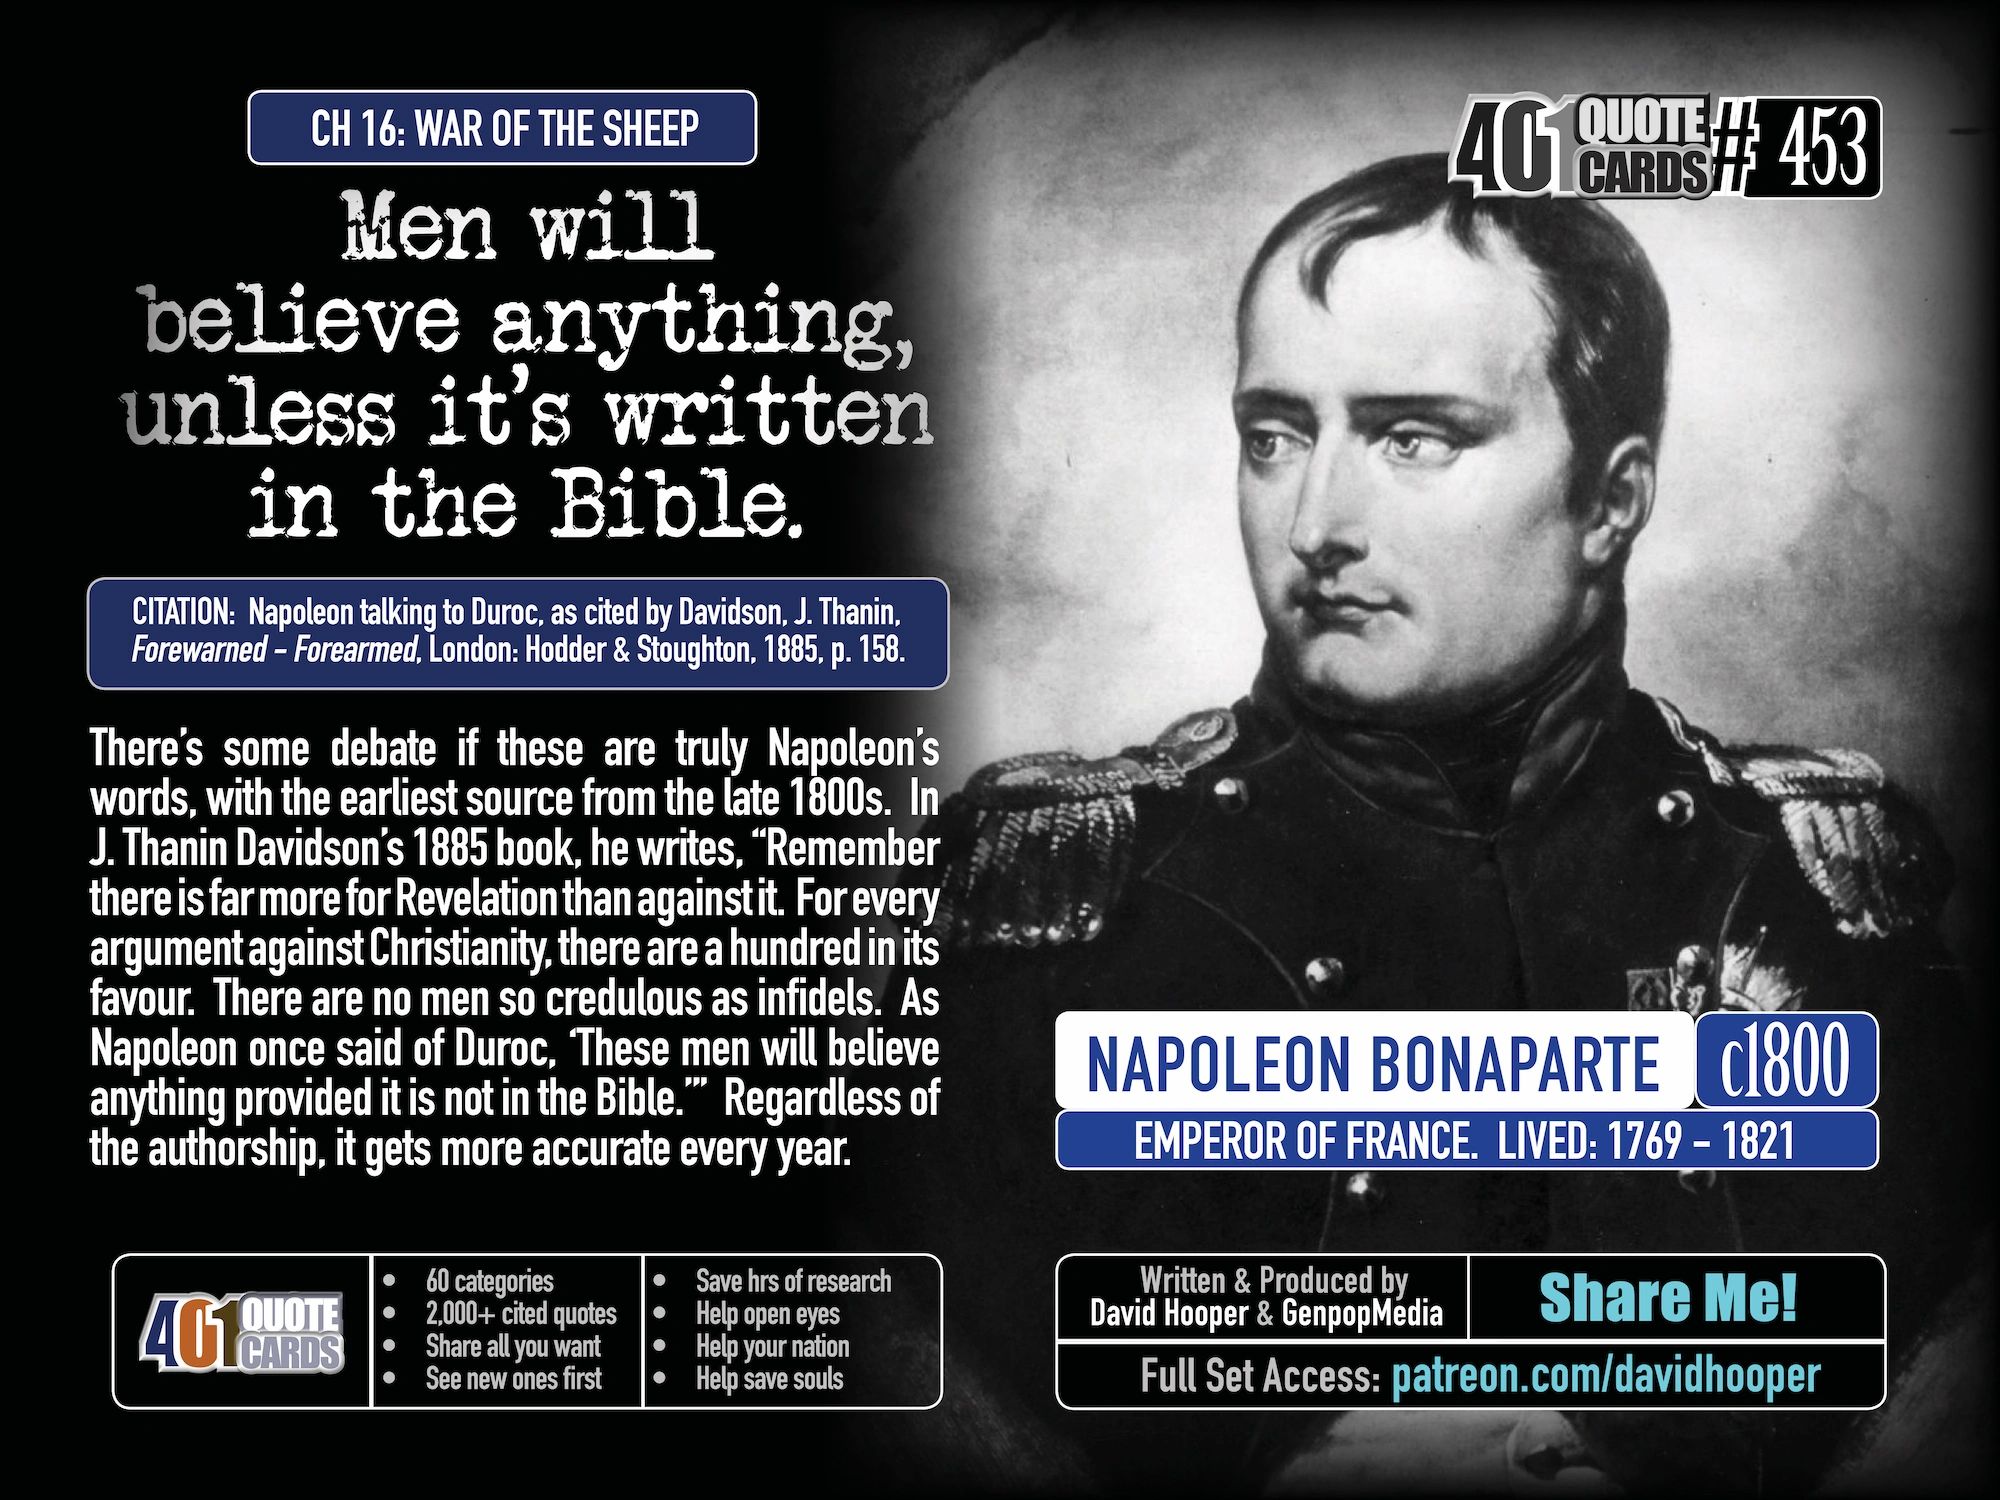 Napoleon Quote: Men will believe anything, unless it's written in the Bible. 401 Quotes. Genpopmedia